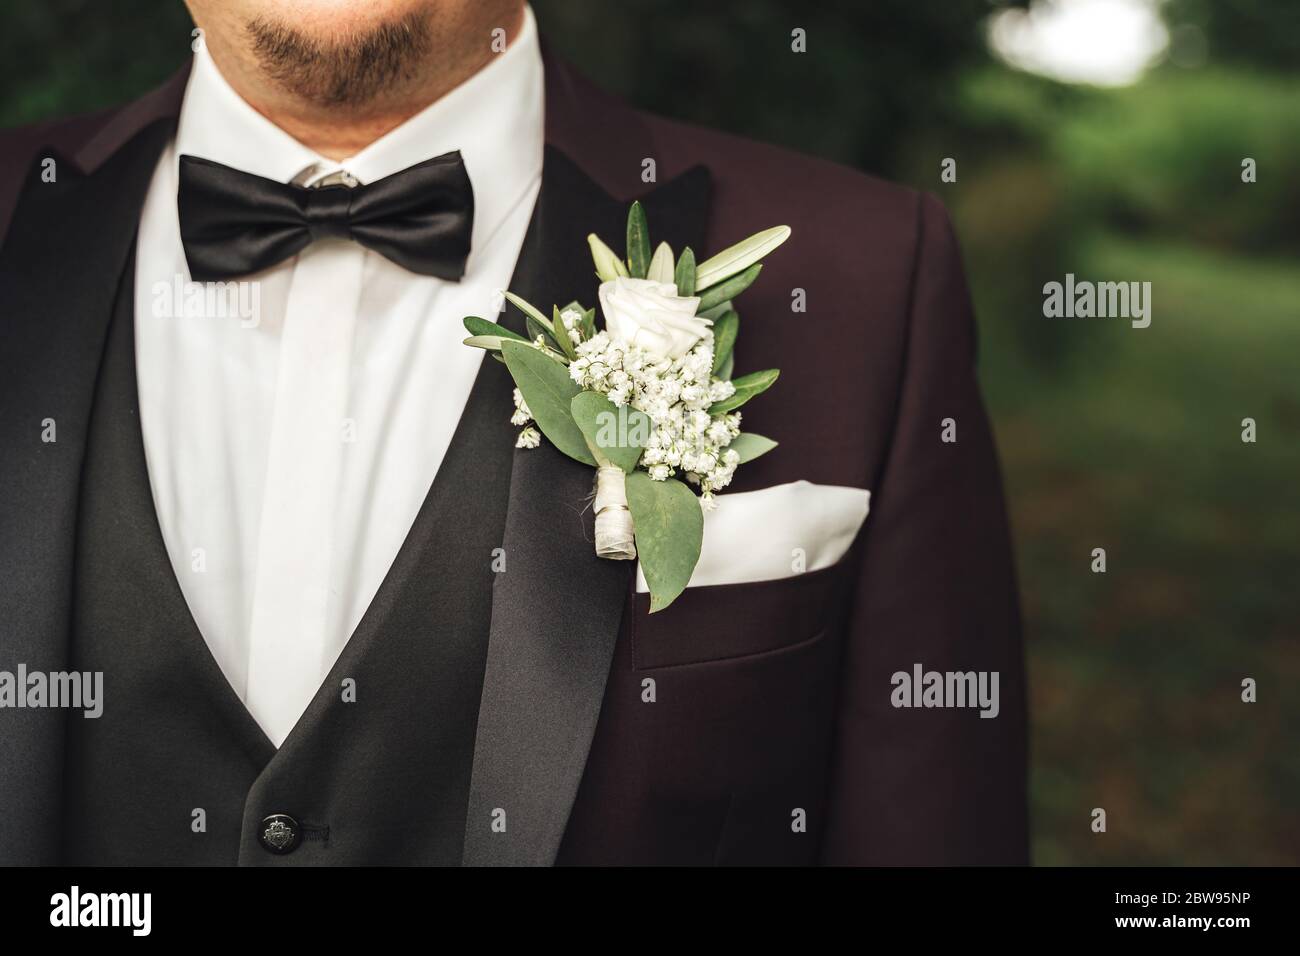 Close up of white rose wedding boutonniere on groom's lapel of black suit. Outdoor photo, blurred green foliage background. Wedding day concept. Stock Photo